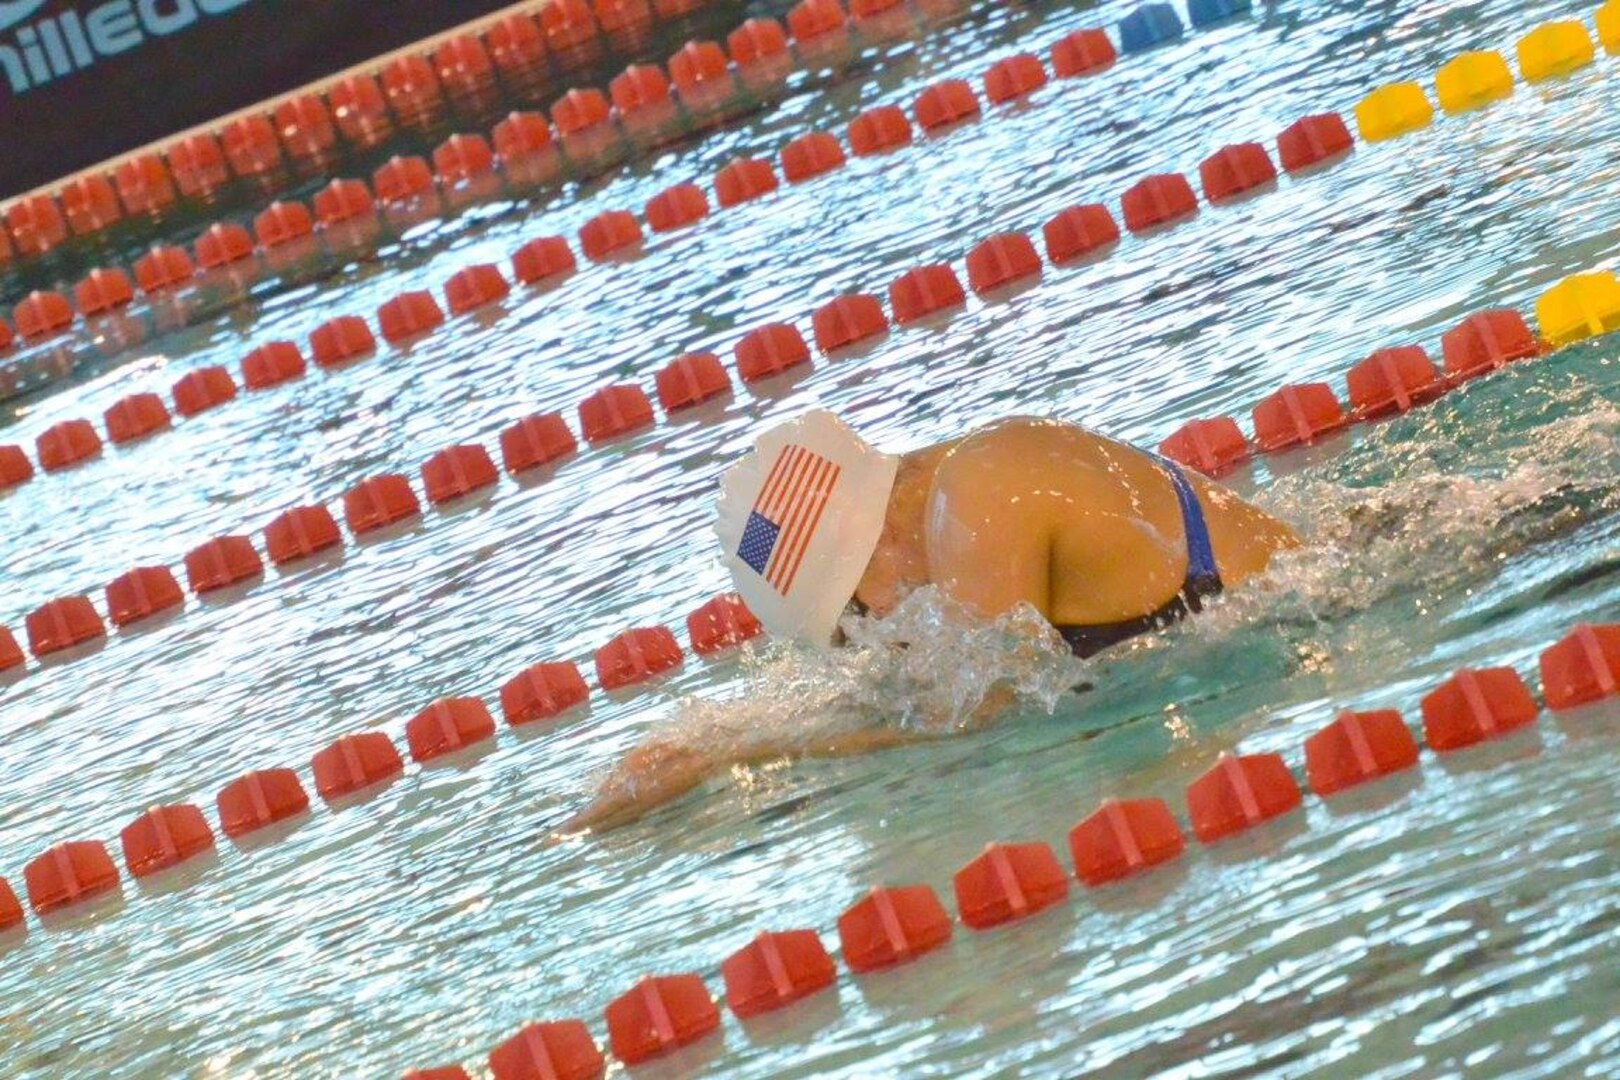 Army Sgt. Elizabeth Wasil (Ft. Carson, Colo.) races to the finish during her gold medal performance in the 100m breaststroke in the CISM ISC para-swimming classification during the 2015 Conseil International du Sport Militaire (CISM) Swimming & Para-Swimming Open.